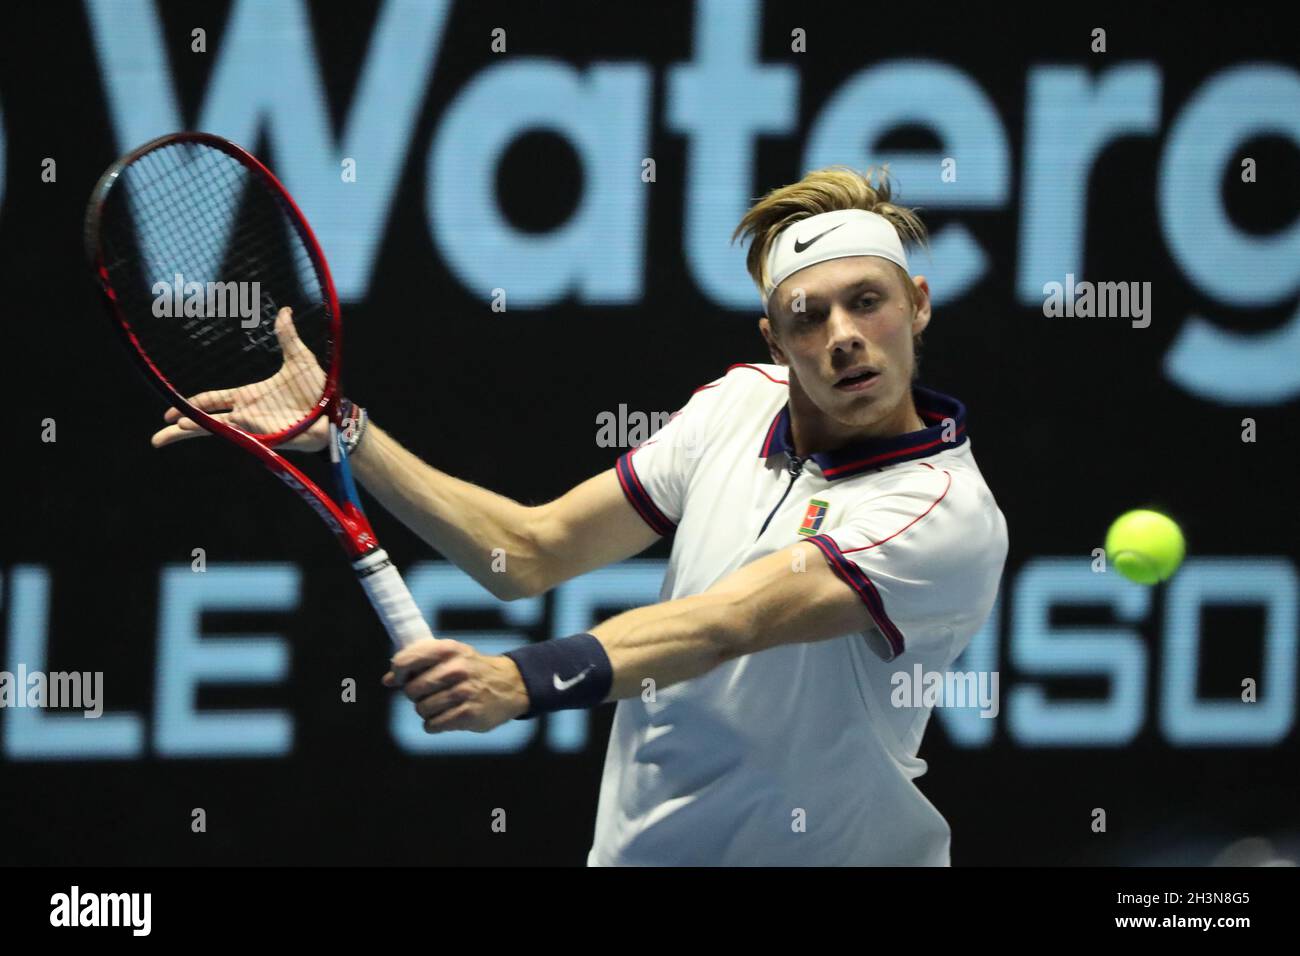 Denis Shapovalov of Canada in action during the 2021 St